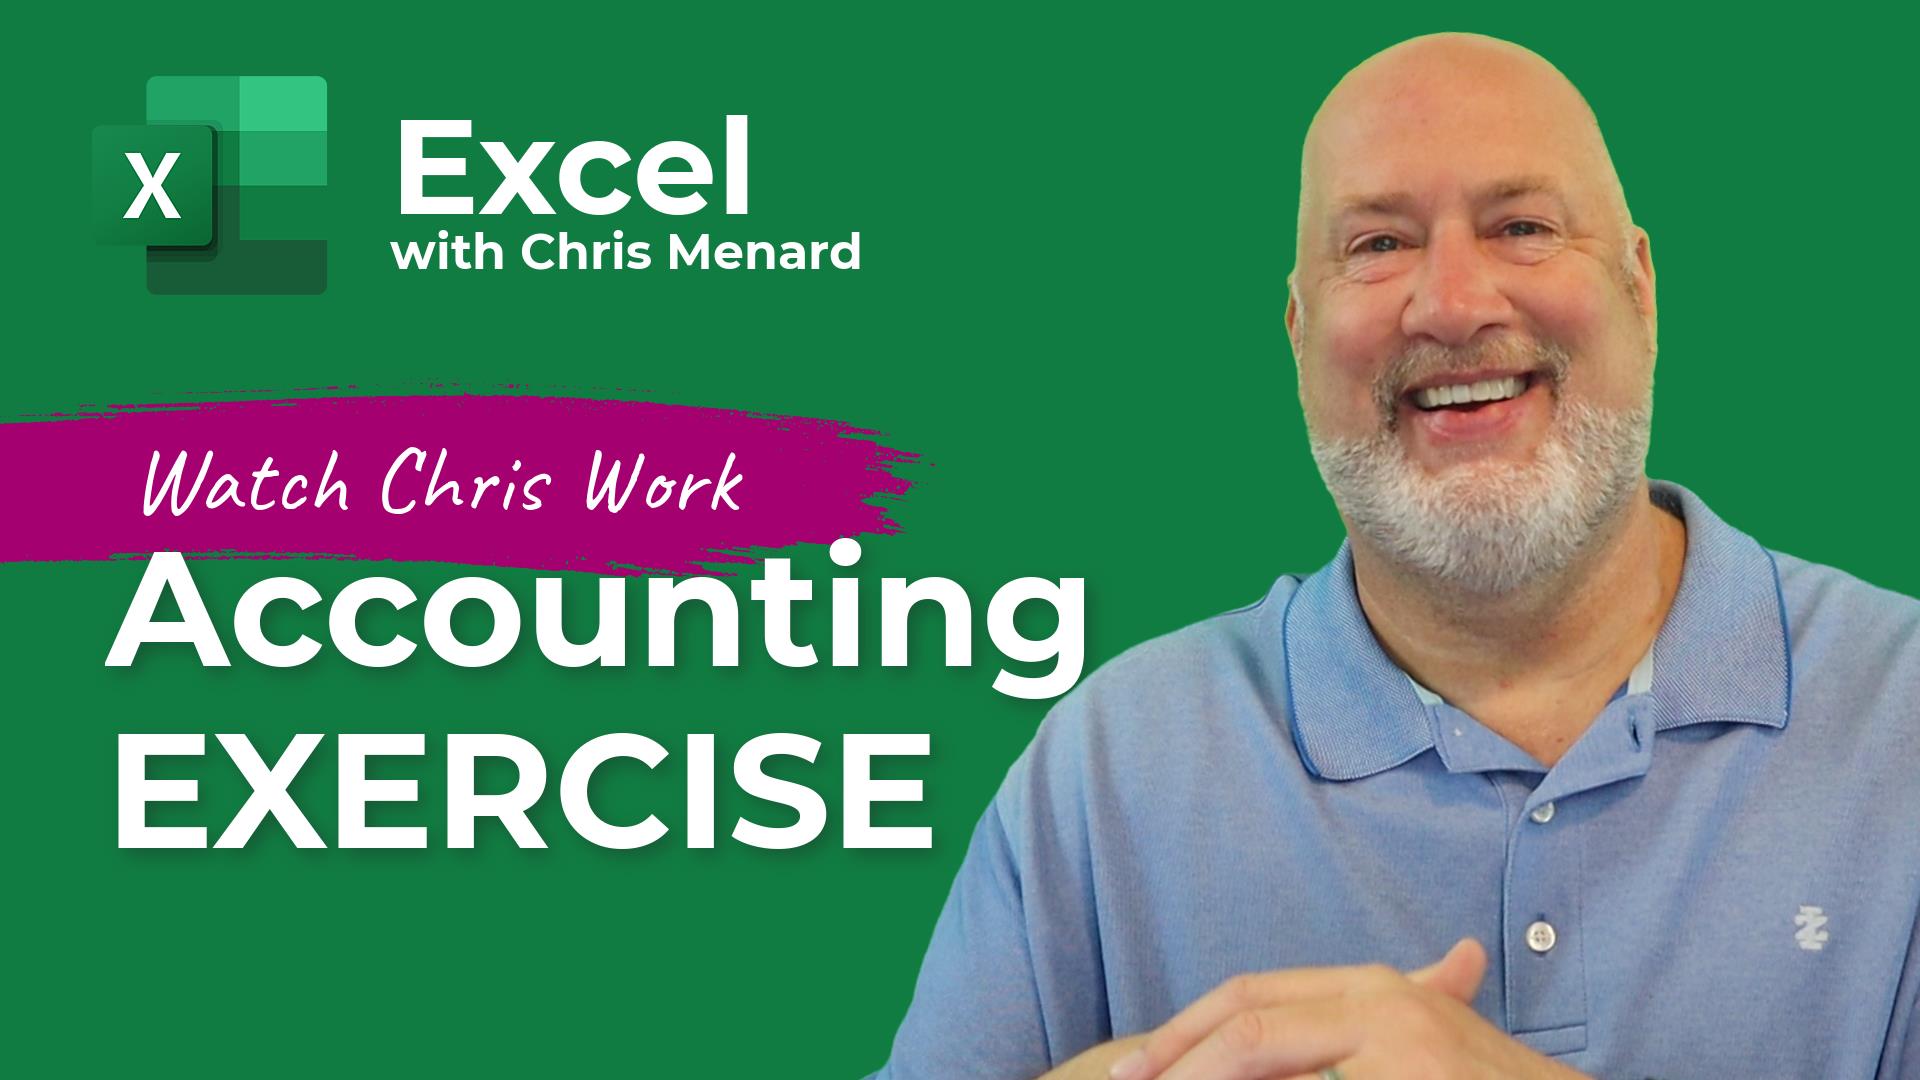 Excel Accounts Payable / Accounts Receivable Exercise - Watch Chris Work